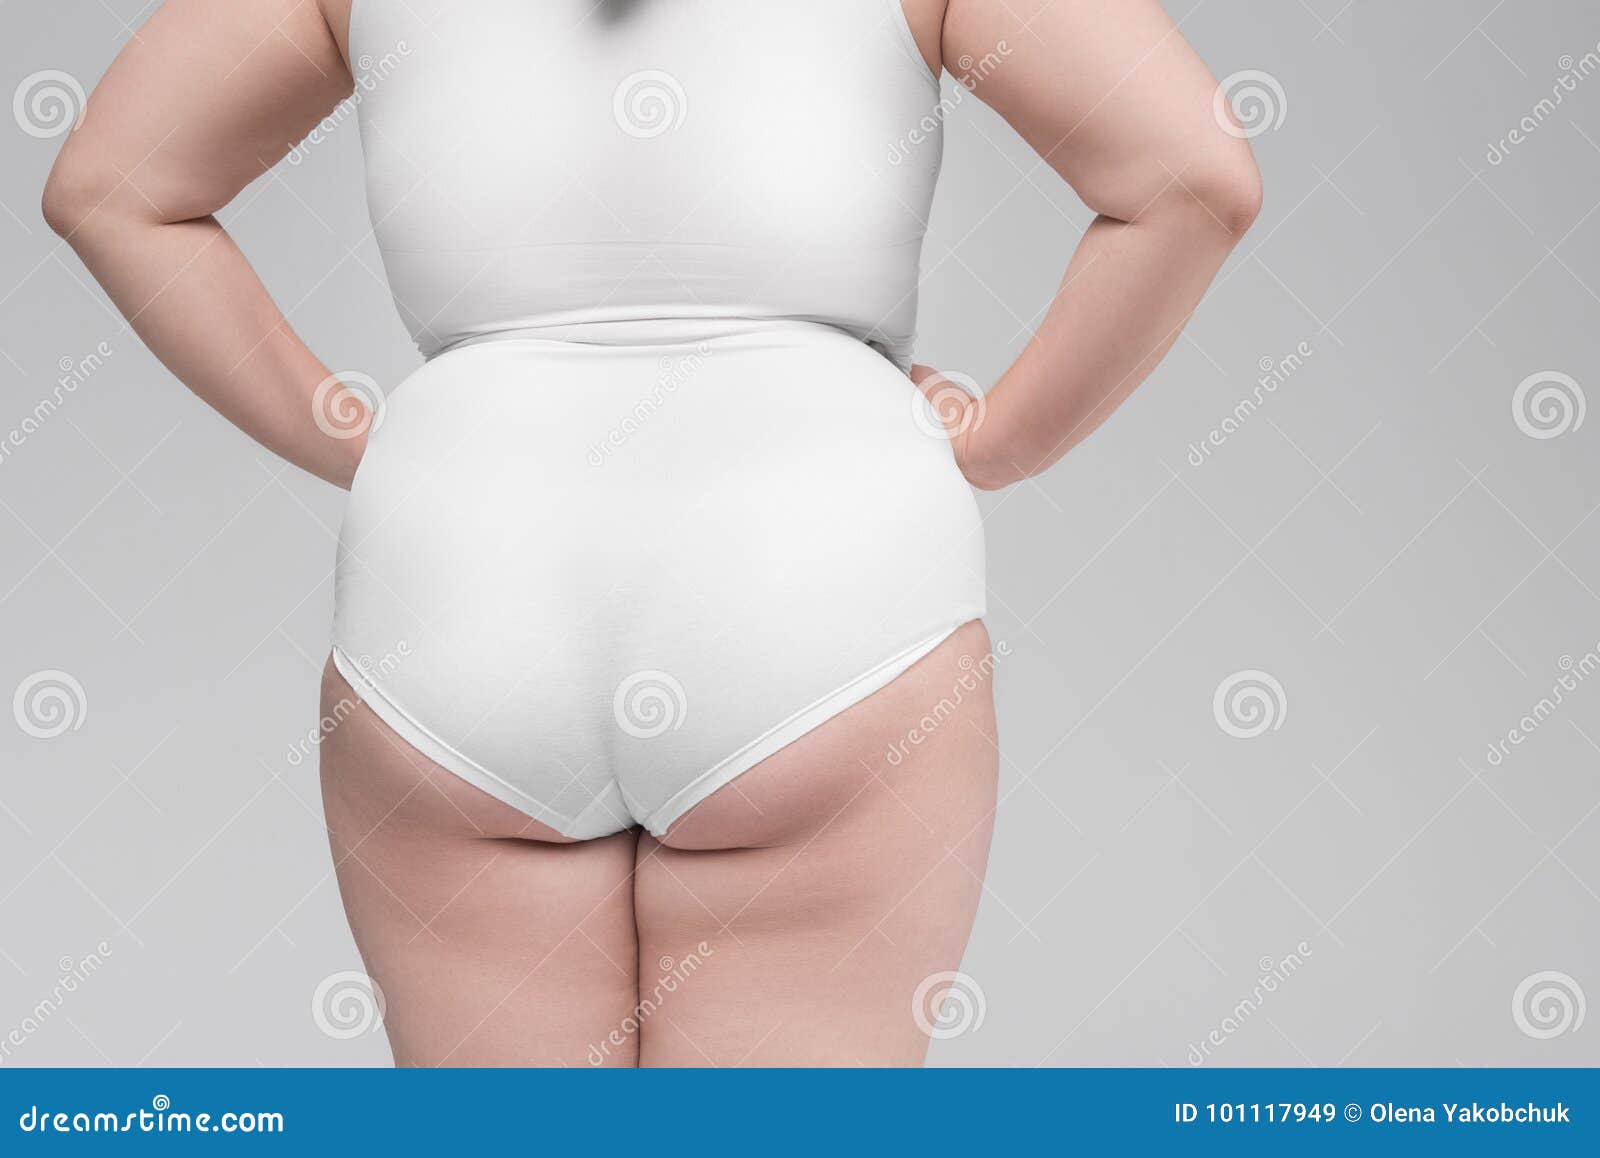 Back of Thick Girl Posing in Underwear Stock Image - Image of